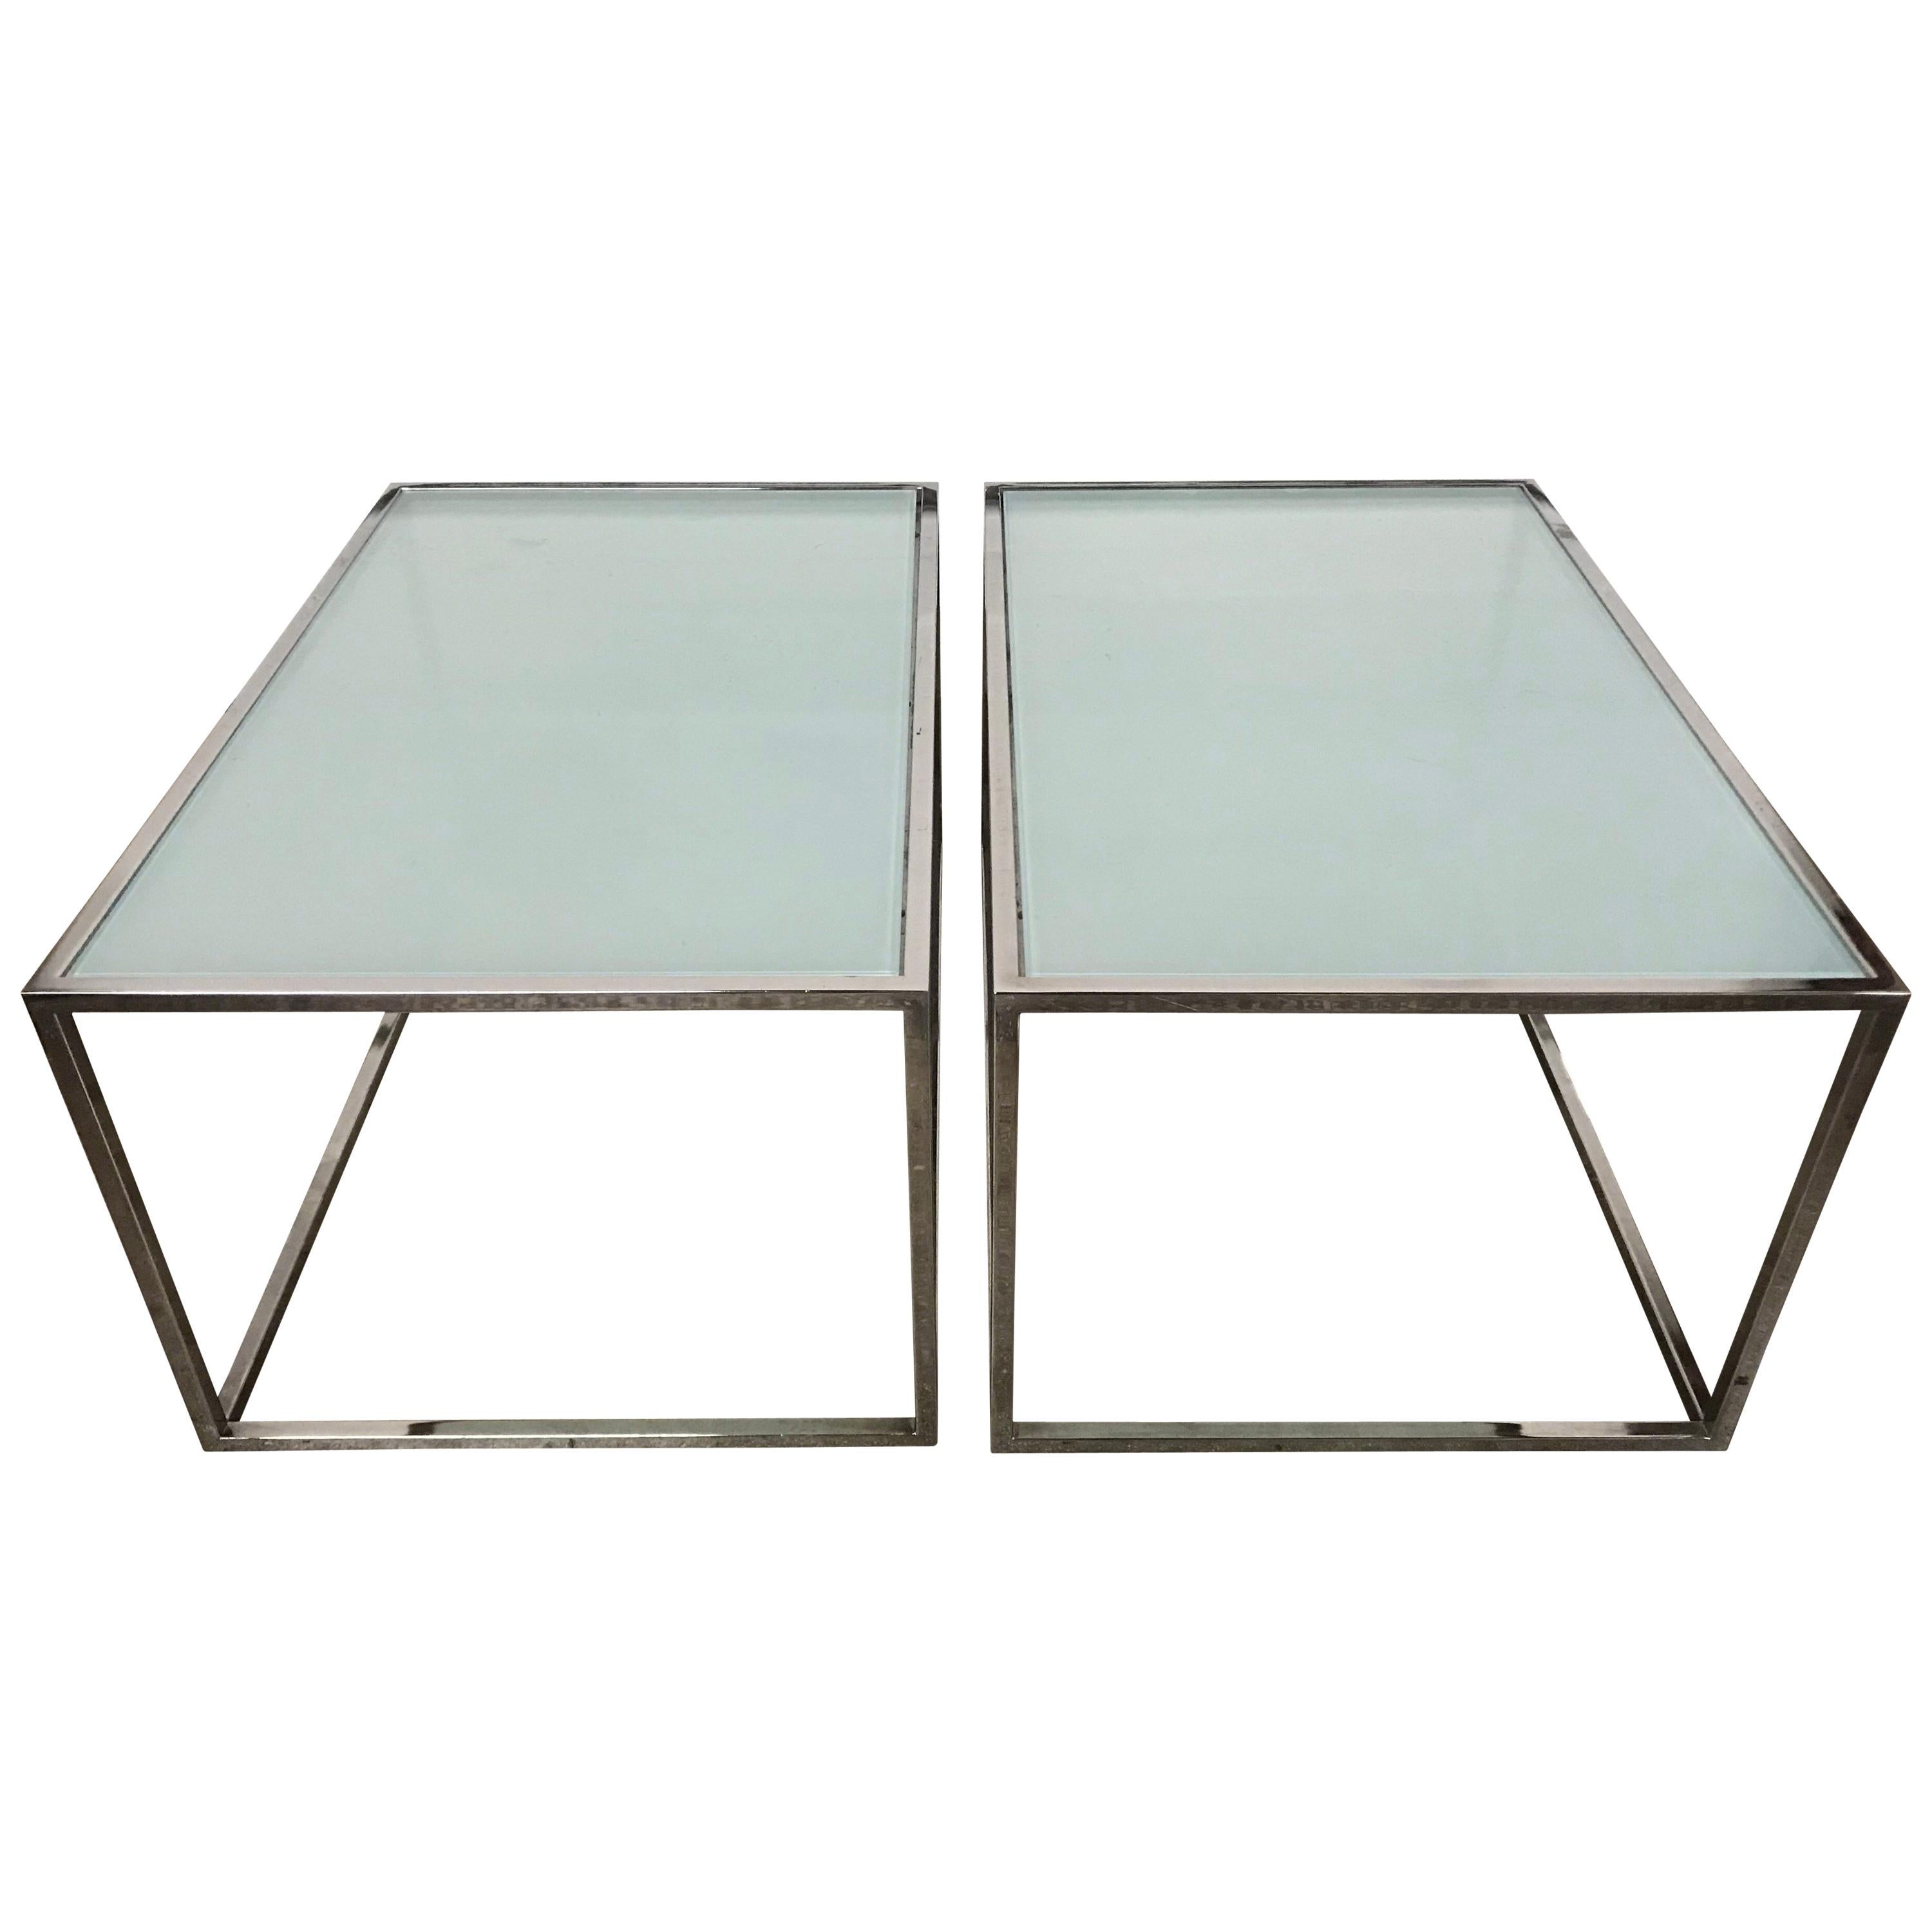 Pair Chrome and Frosted Glass Tables in the Style of Milo Baughman, circa 1970s.